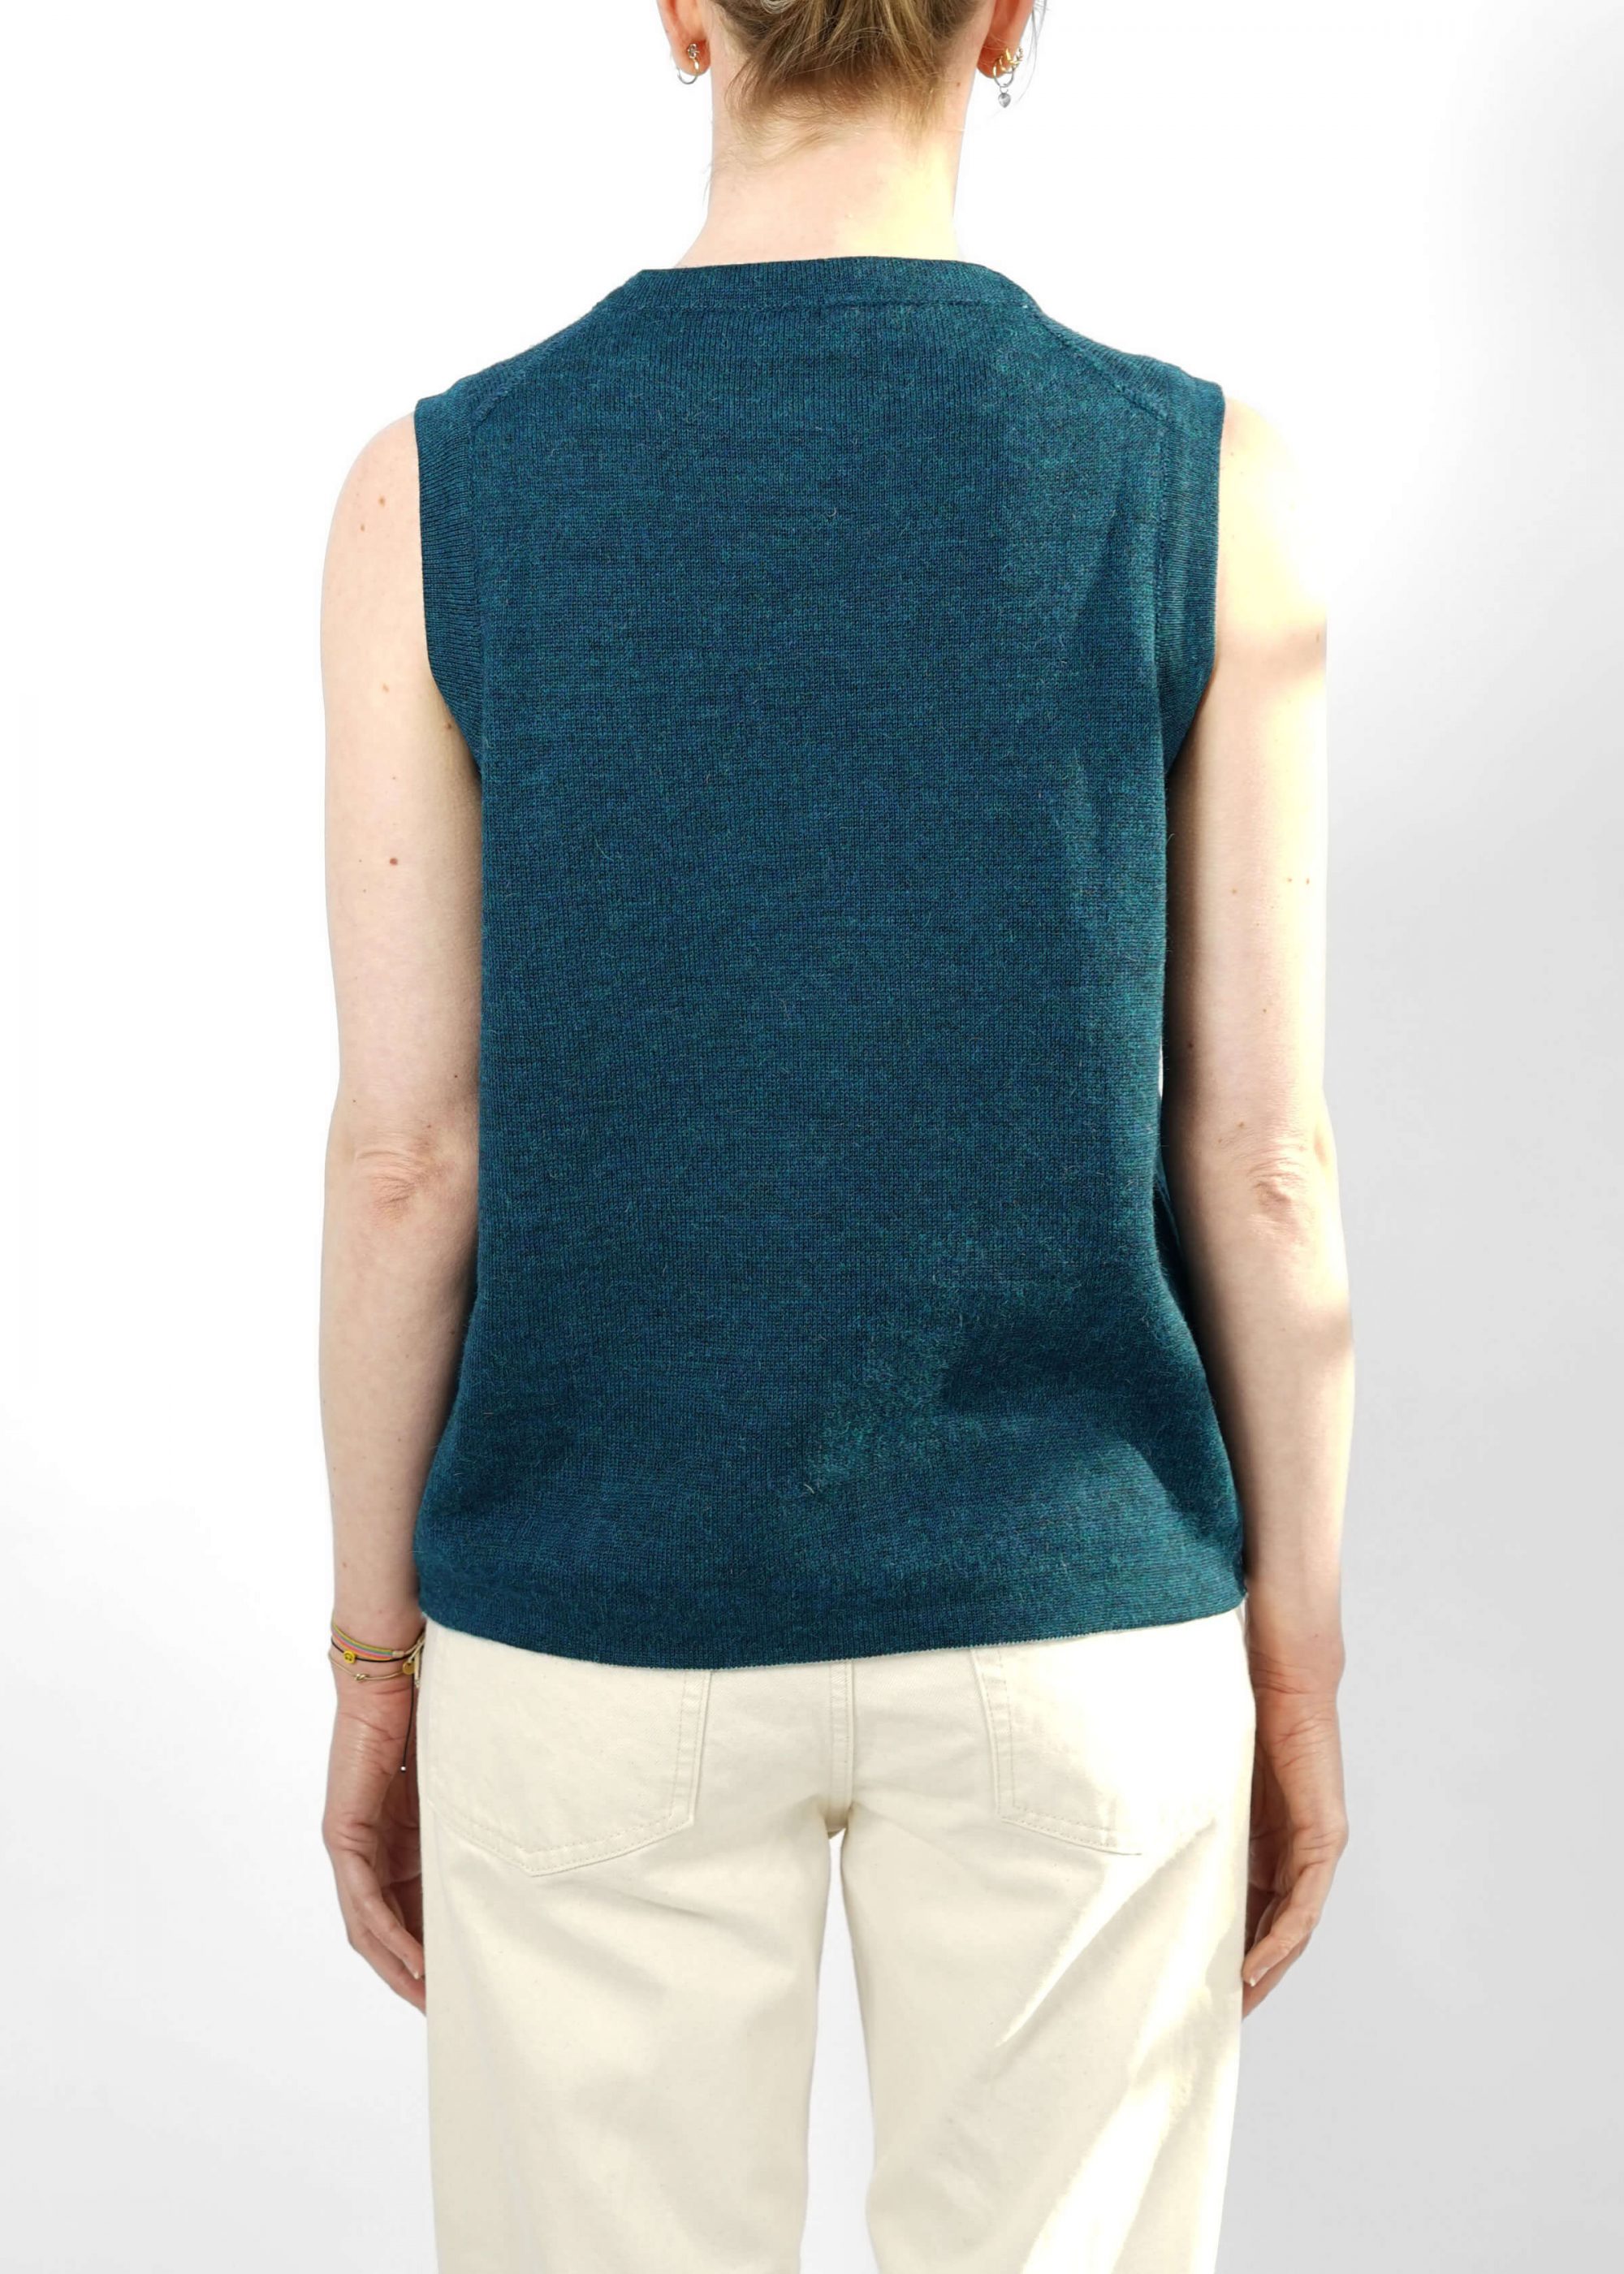 Product image for »Frei« Reversible Sweater Vest Baby Alpaca